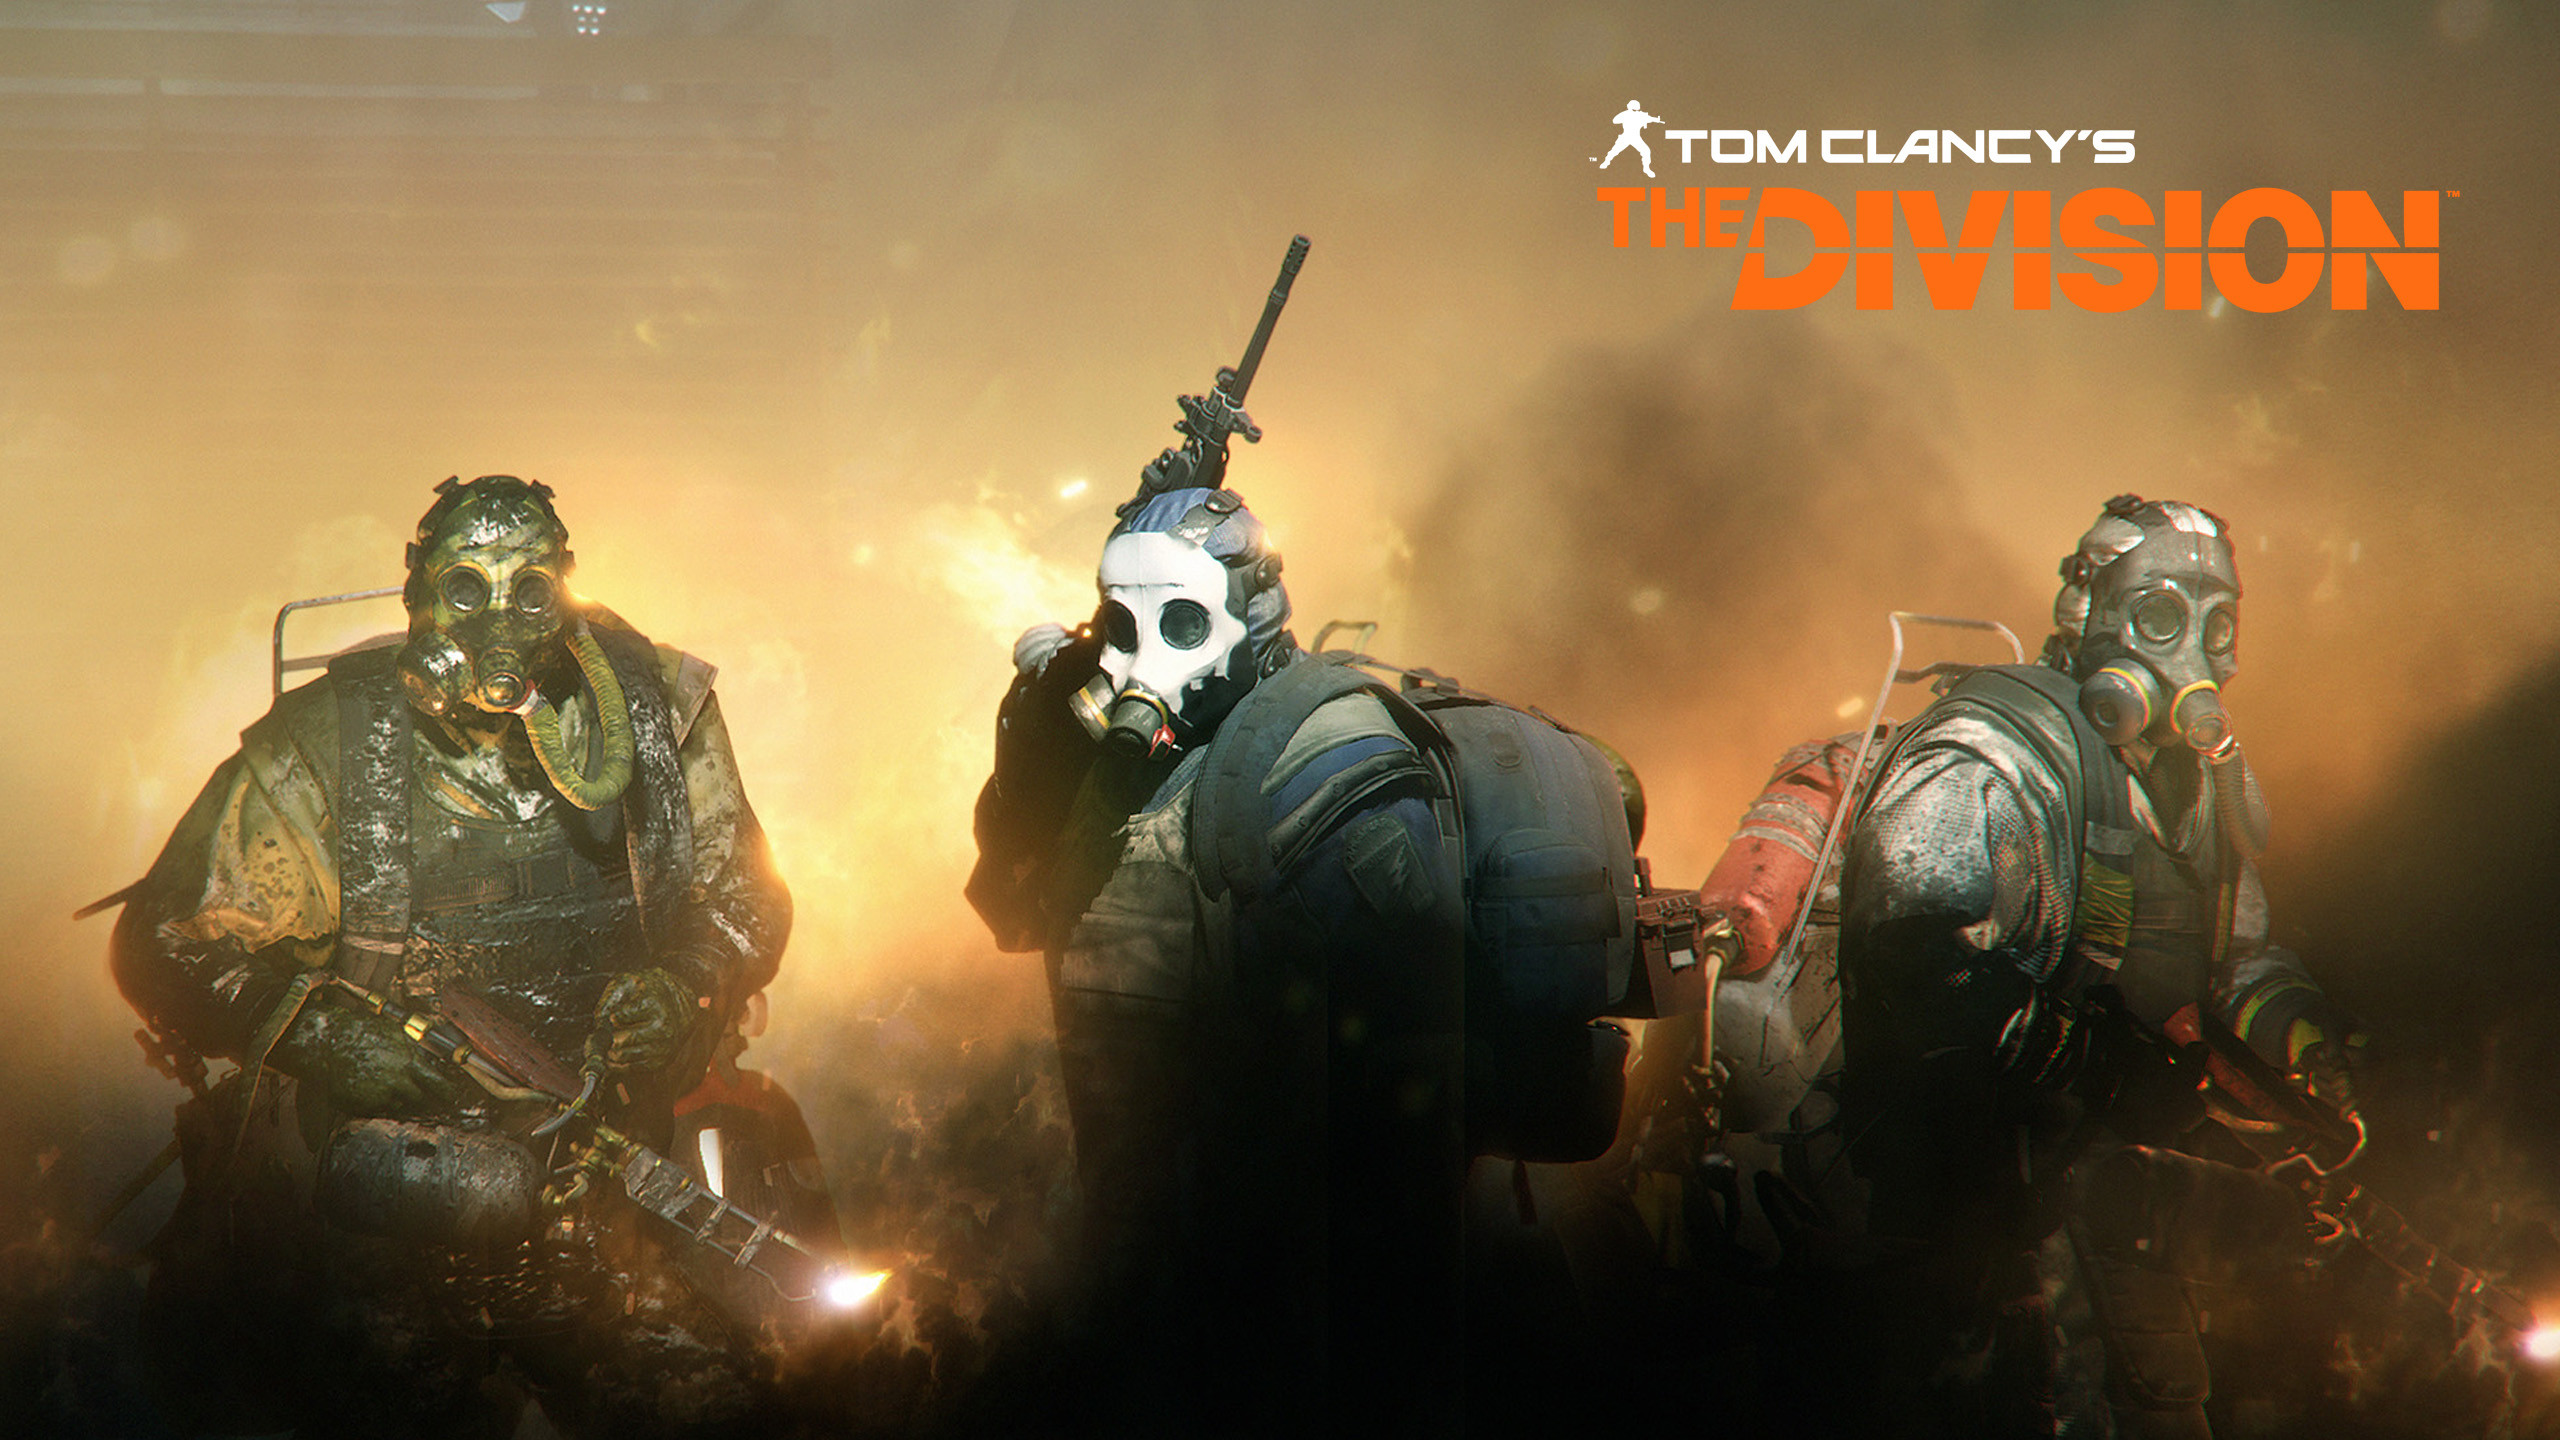 2560x1440 The Division Wallpapers I made : thedivision